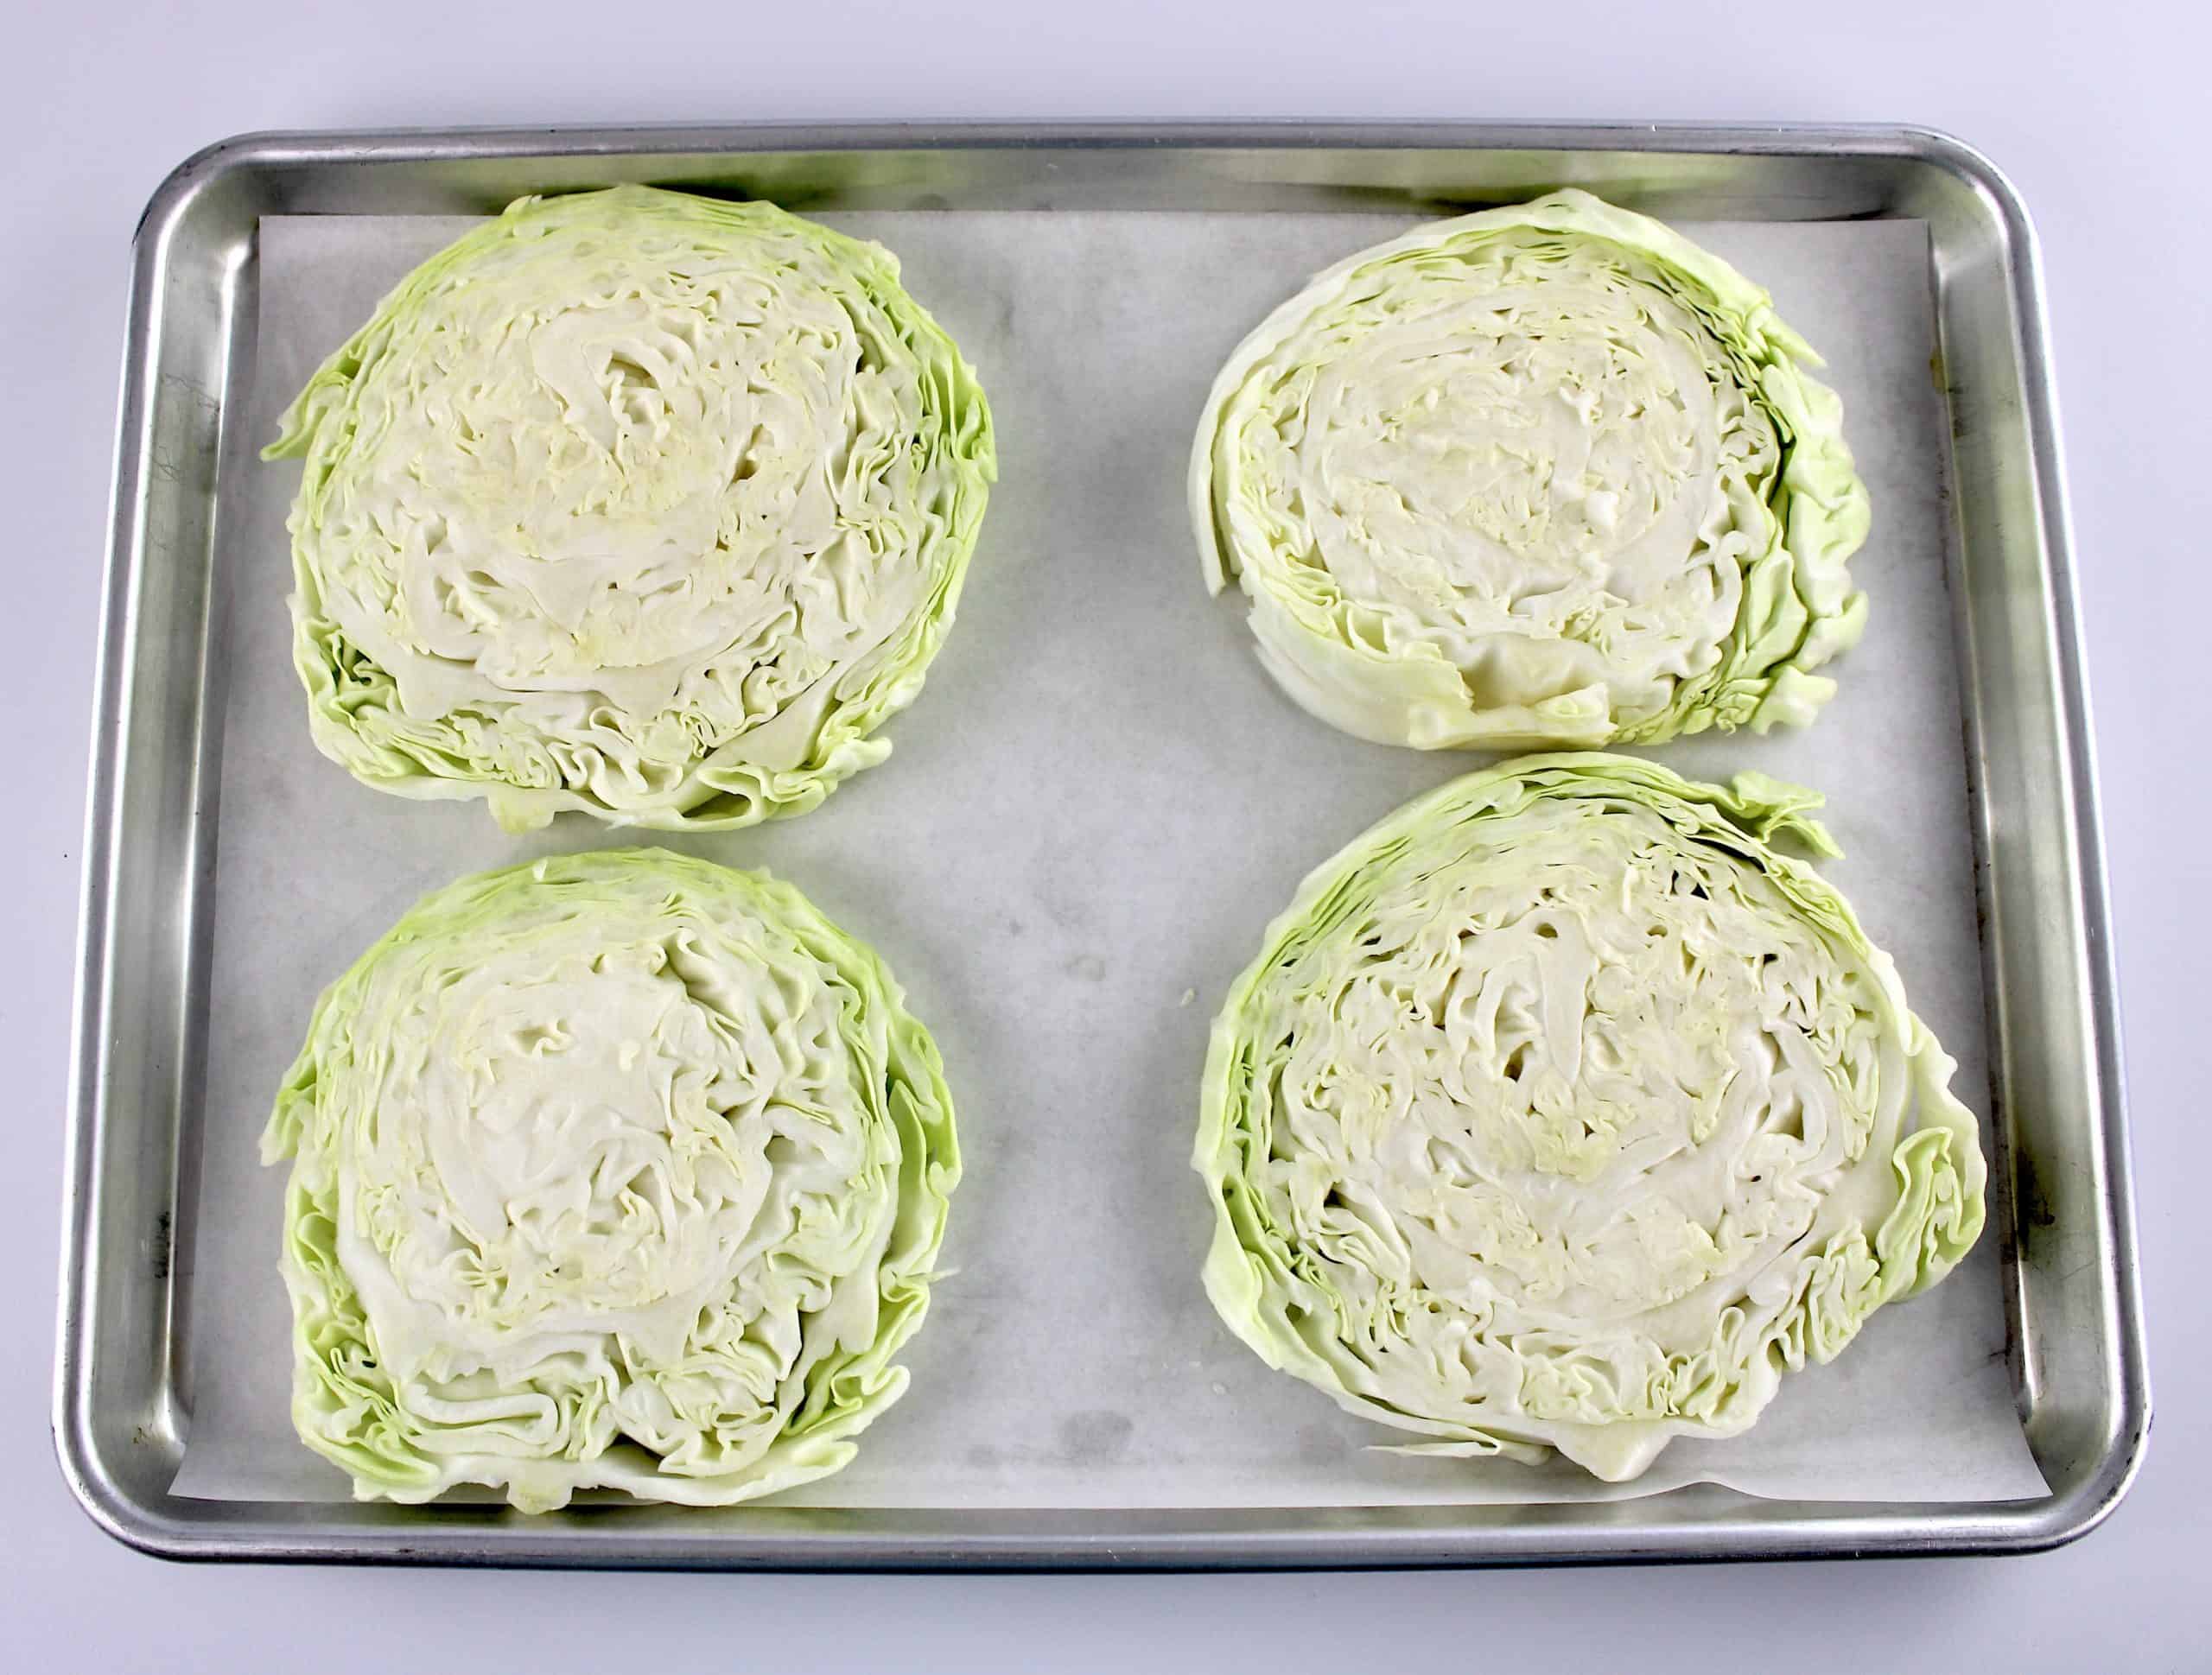 4 cabbage steaks uncooked on baking sheet with parchment paper